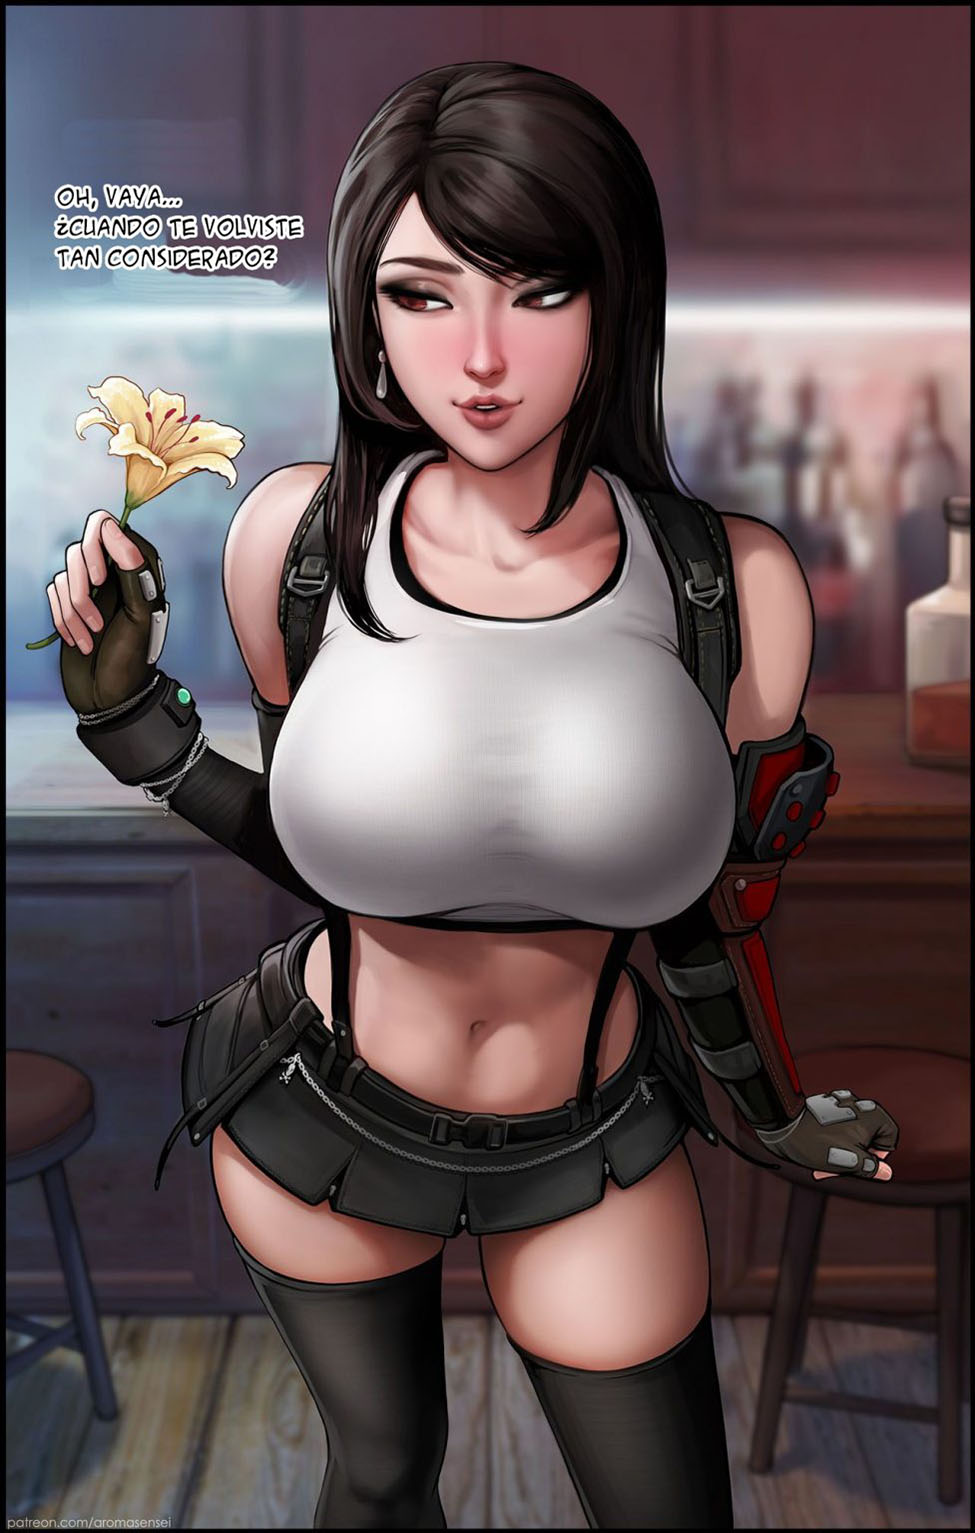 TIFA its for you